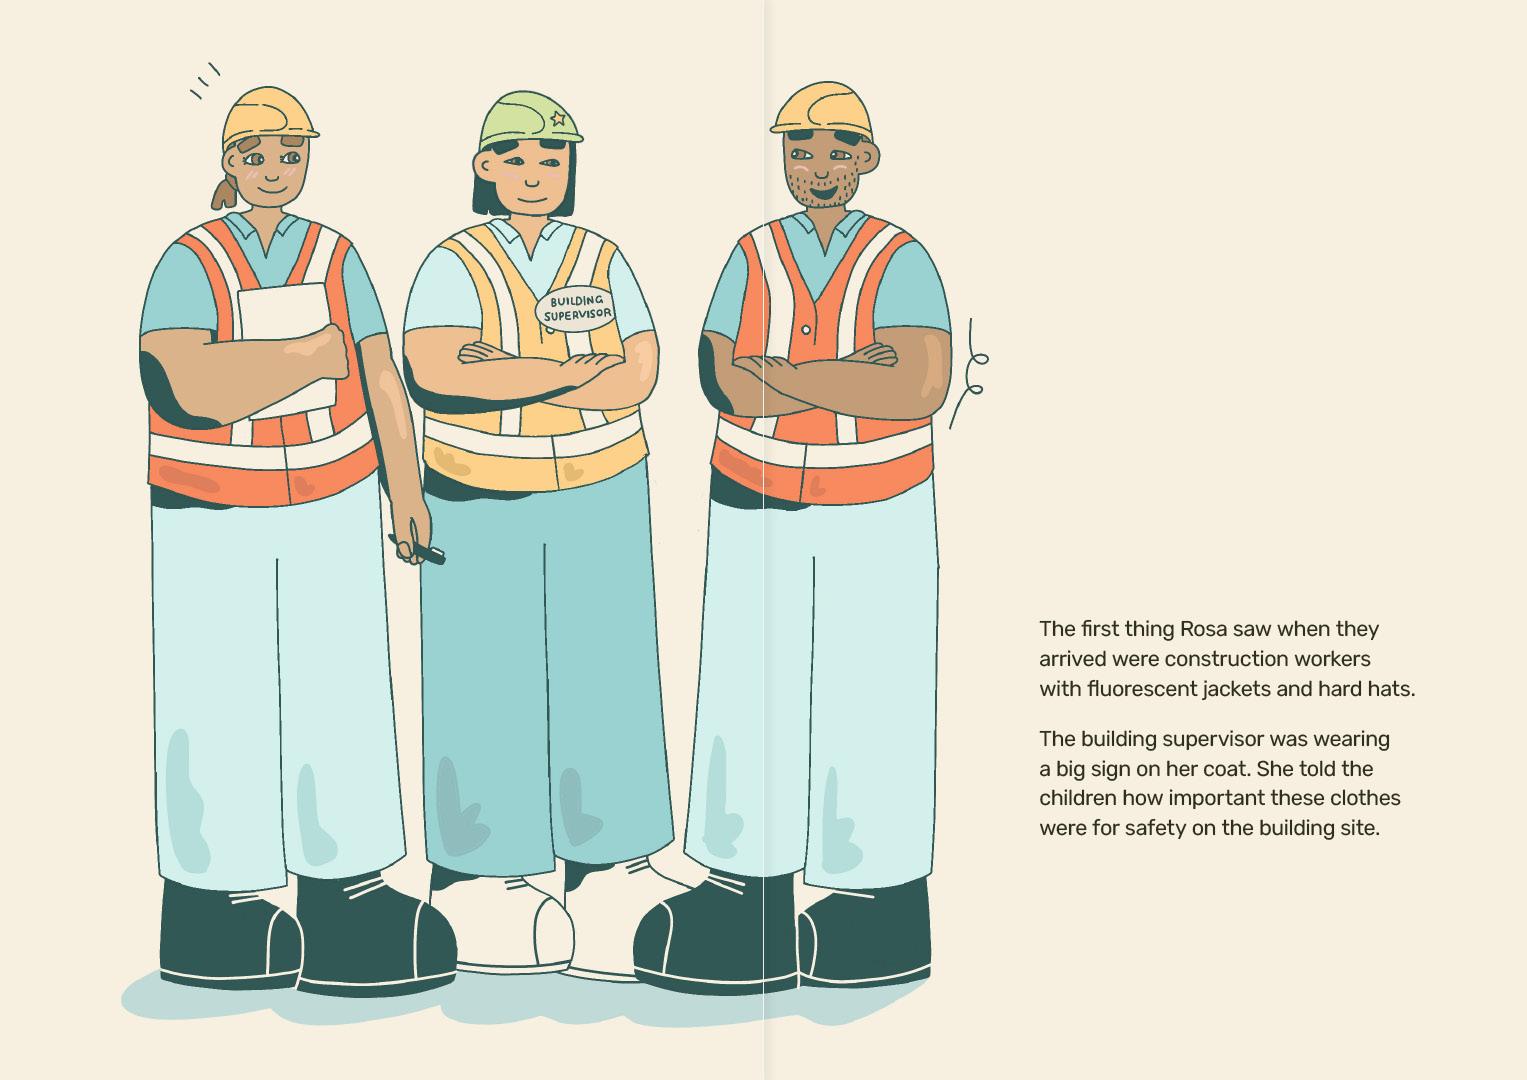 Illustrated spread from eReader picturing 3 construction workers in high vis uniforms and hard hats.